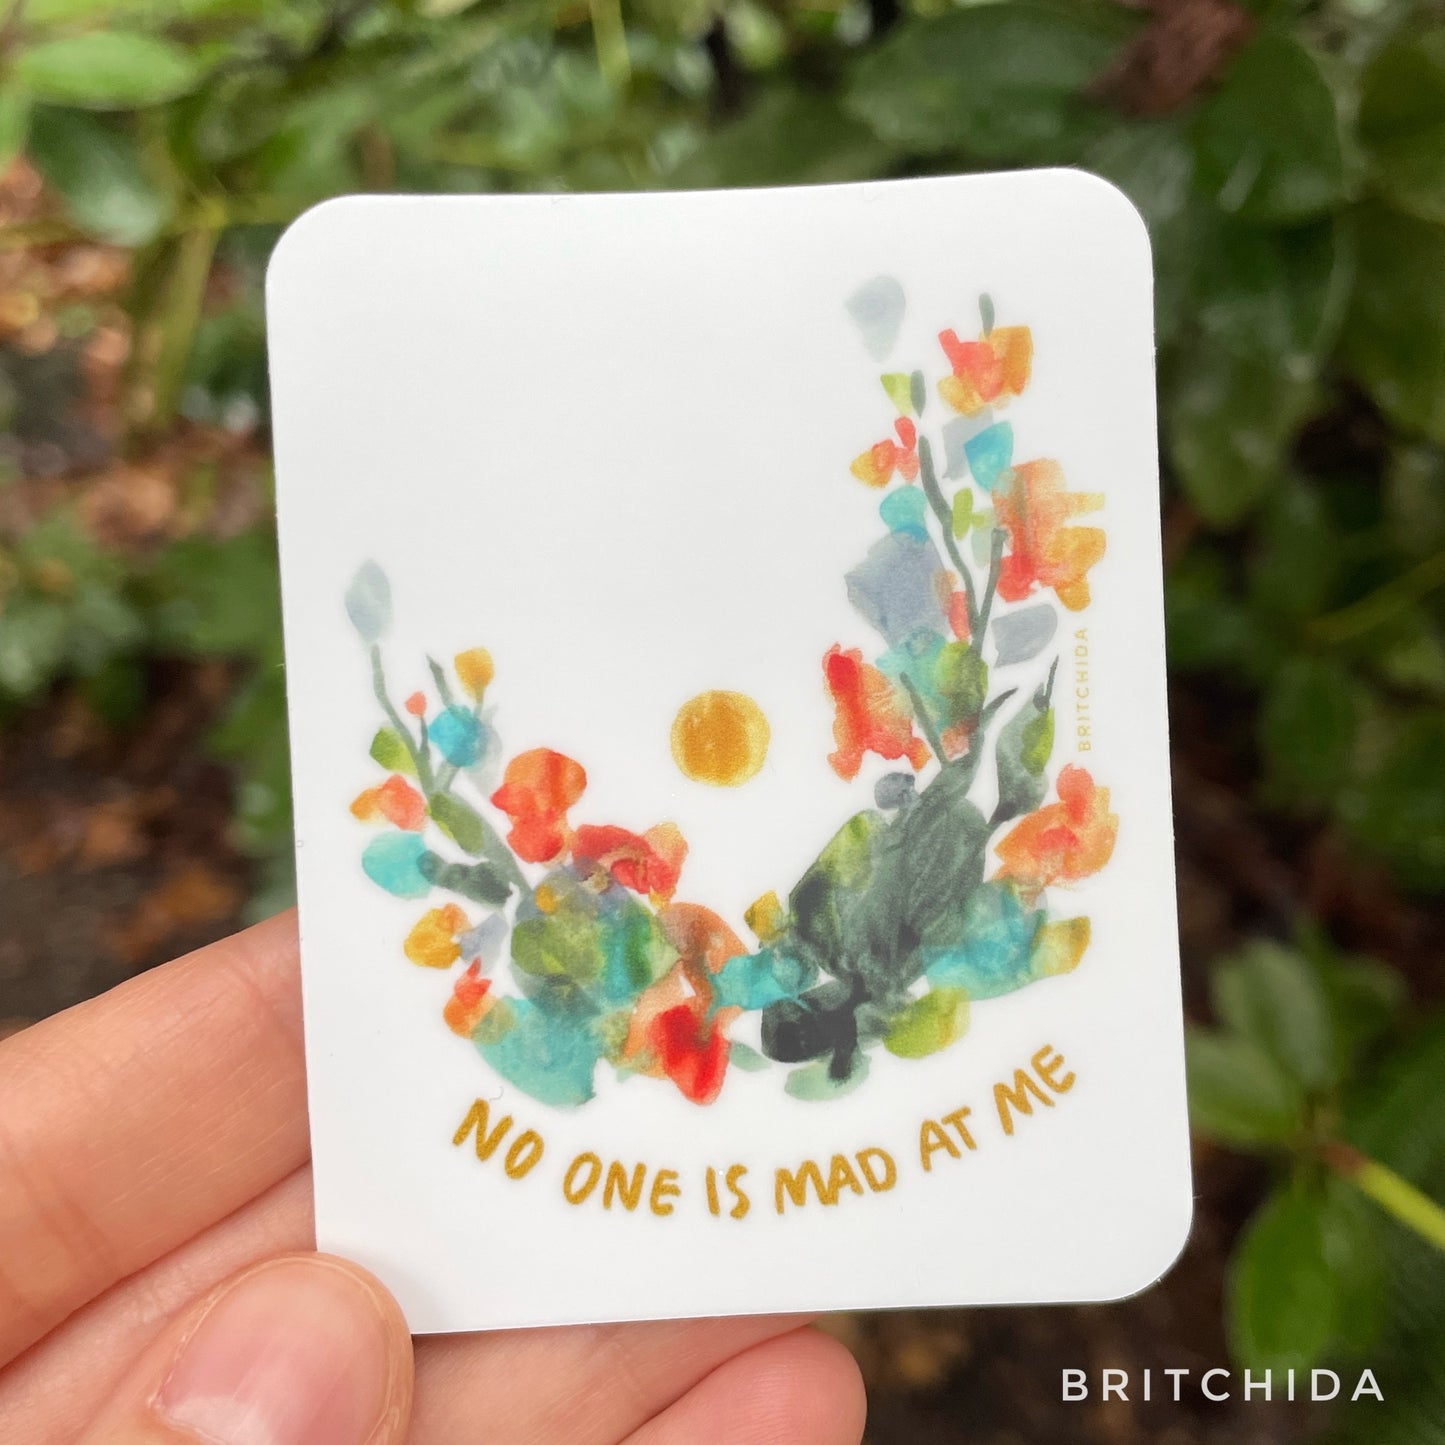 Sticker: No one is mad at me